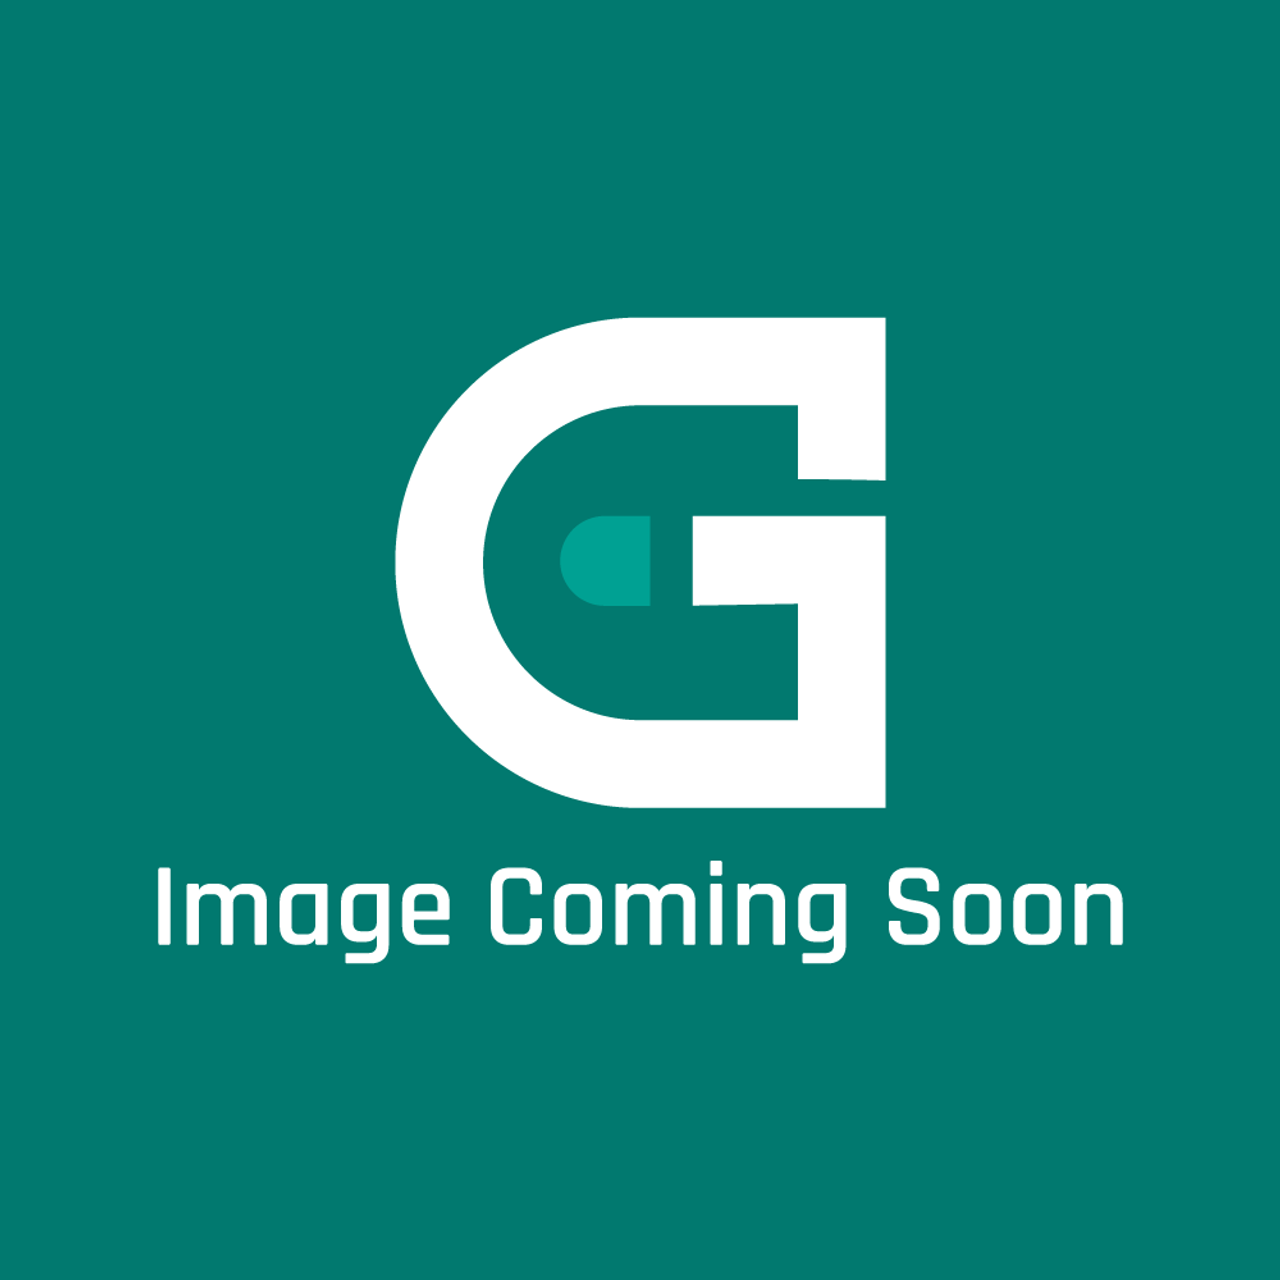 GE Appliances WD01X10458 - Spacer Fan - Image Coming Soon!